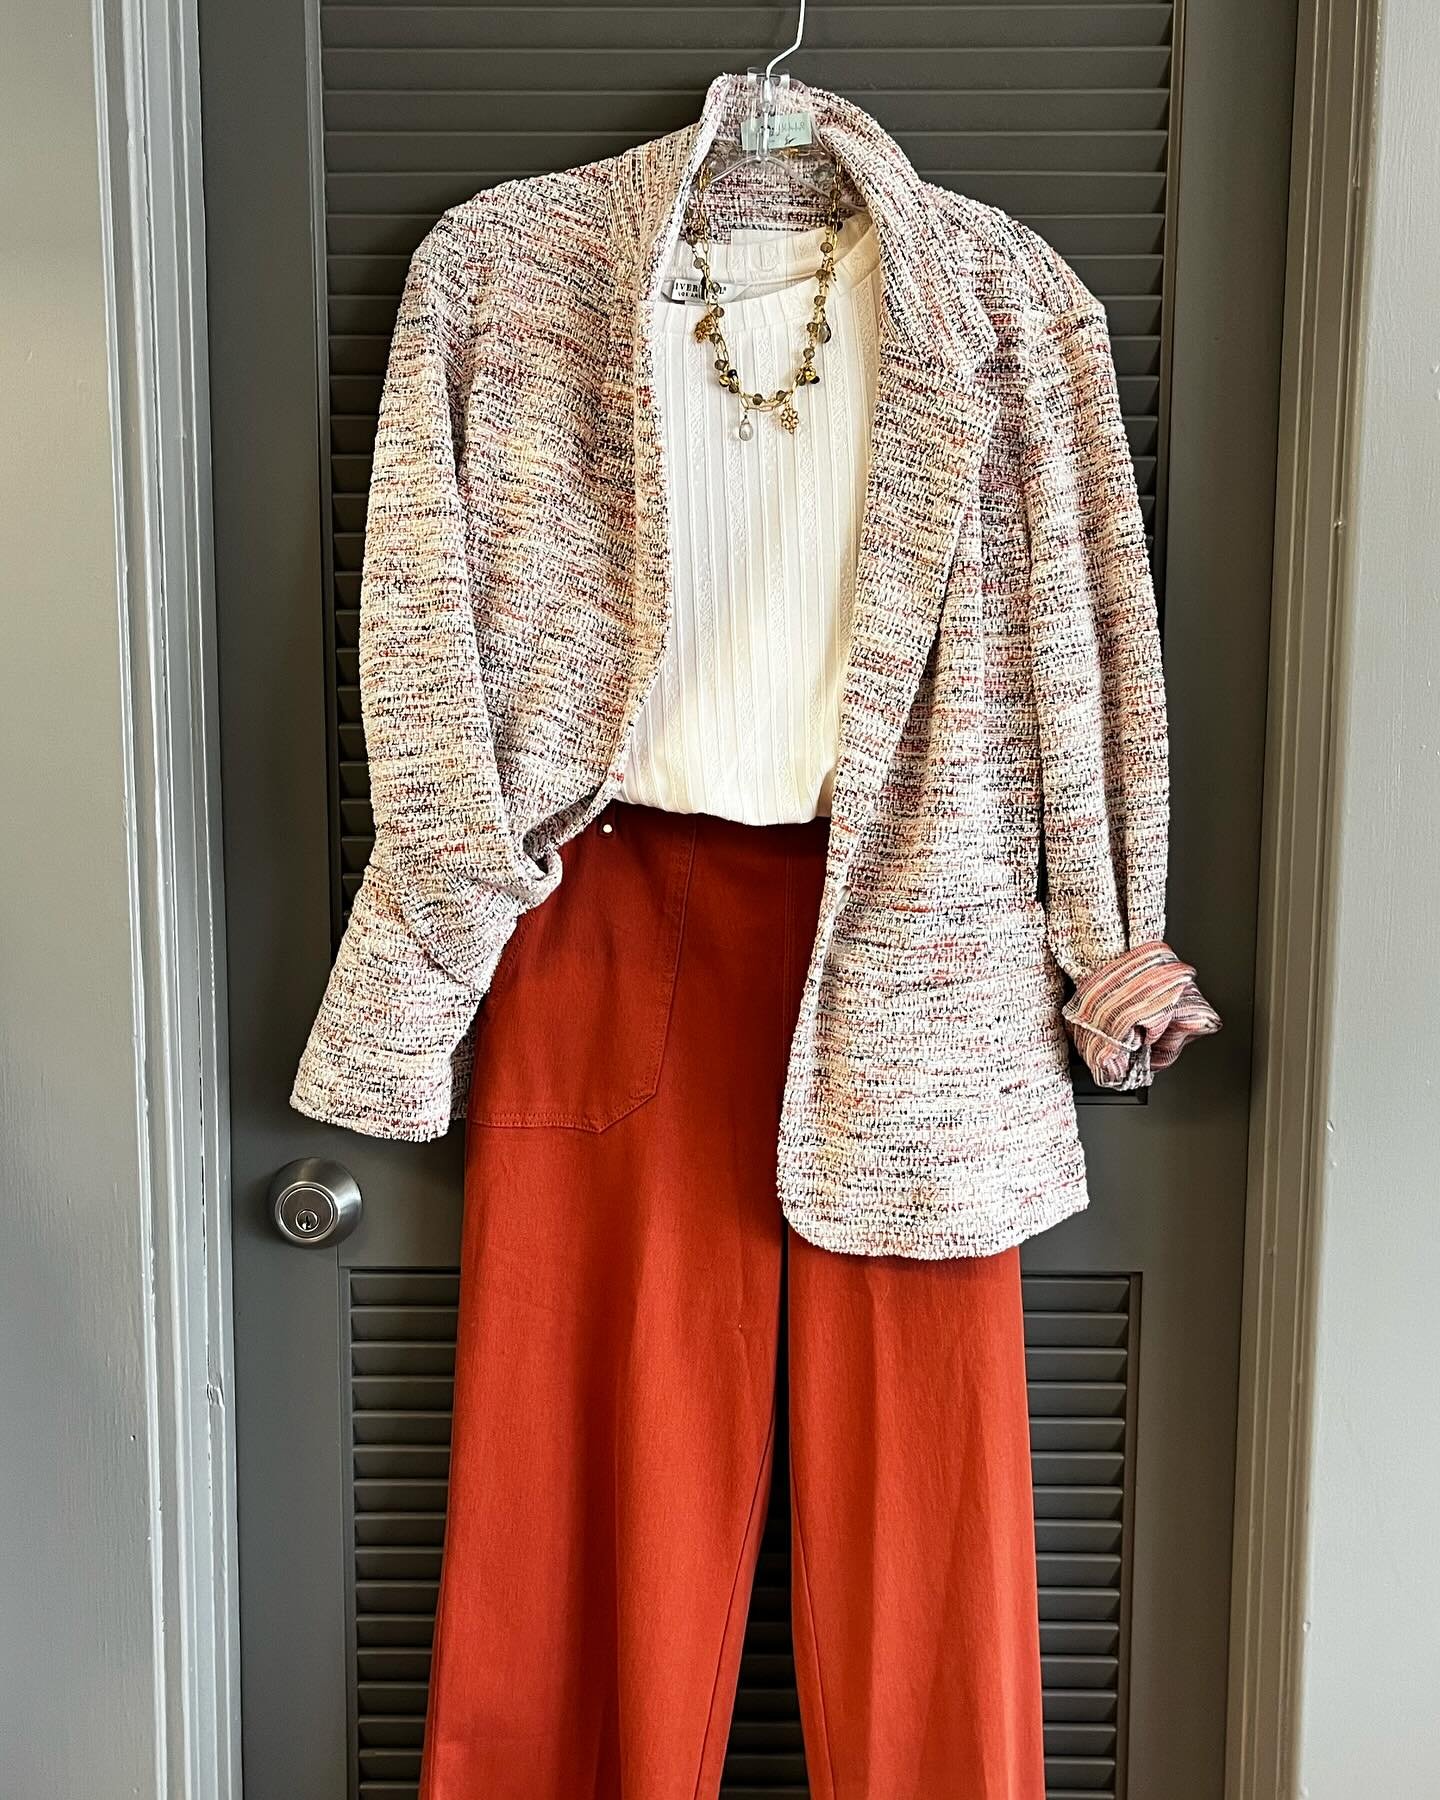 Orange and pink are fun colors for the spring season: intense and captivating shades that will add a touch of liveliness and elegance to your wardrobe. #terianns #livelovemov #visitmariettaohio #ohiotheheartofitall #mymarietta